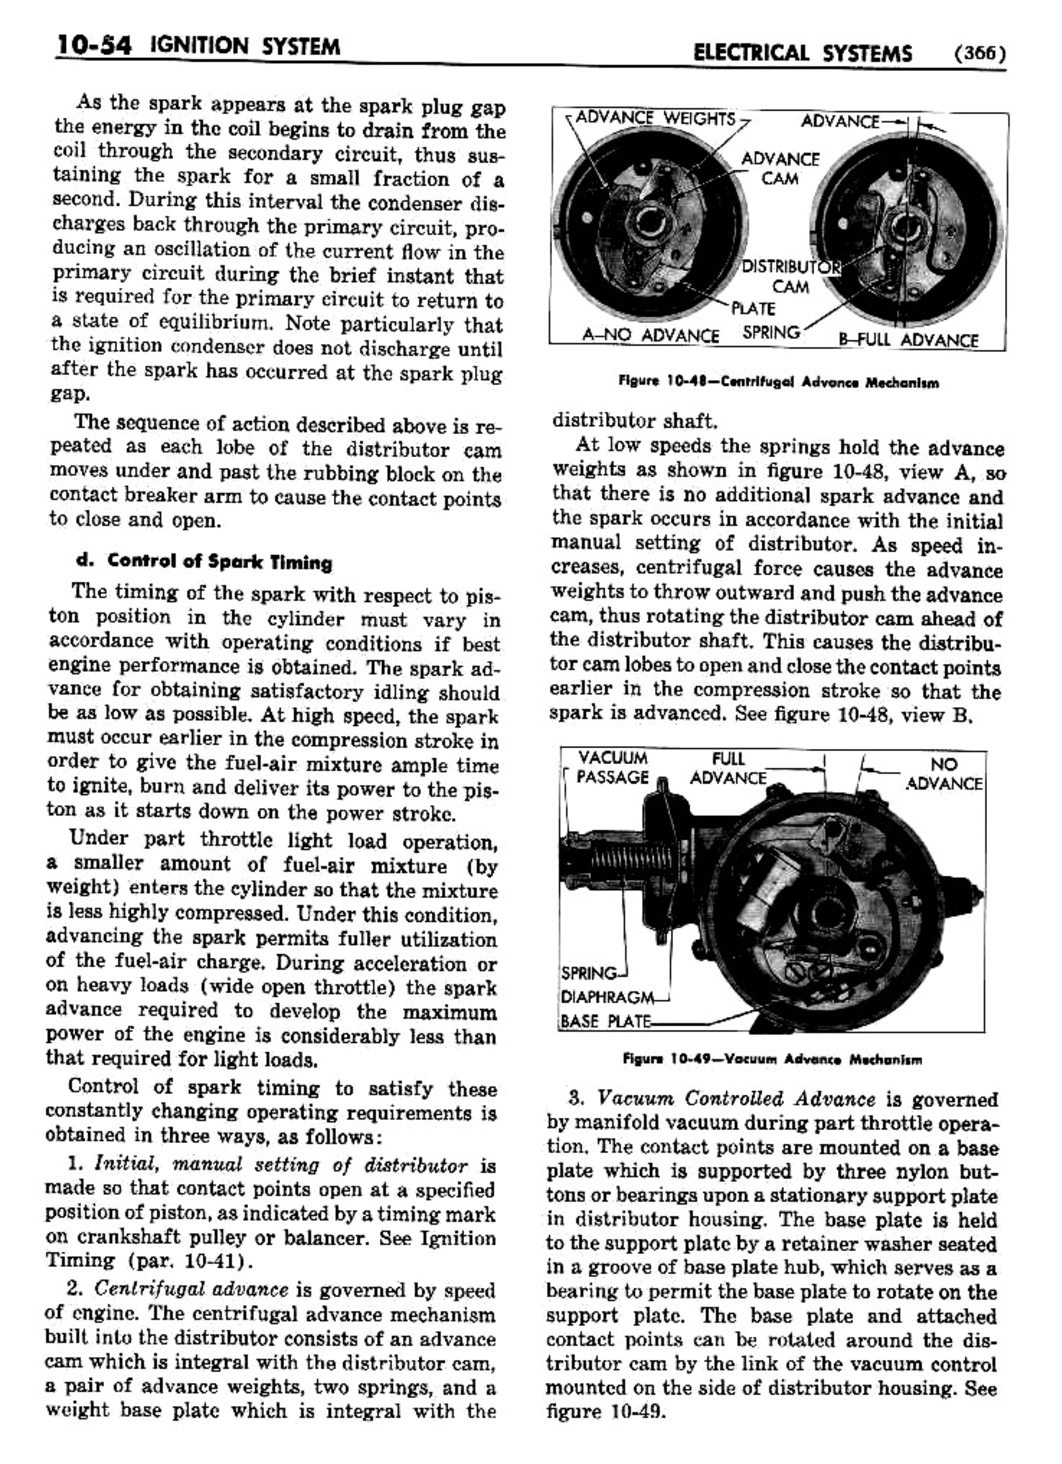 n_11 1954 Buick Shop Manual - Electrical Systems-054-054.jpg